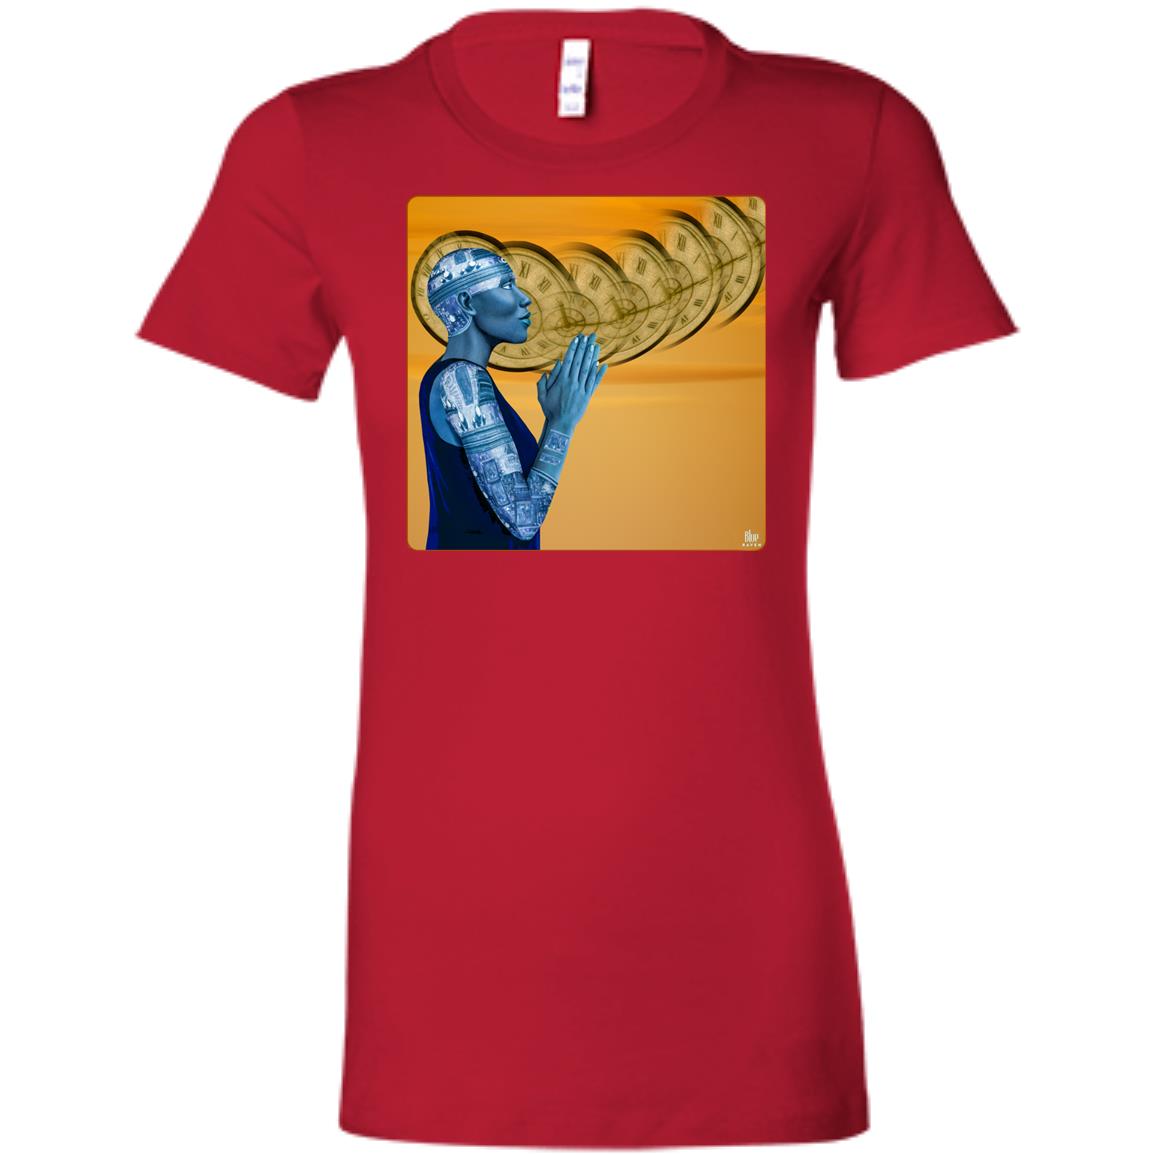 the seer - Women's Fitted T-Shirt